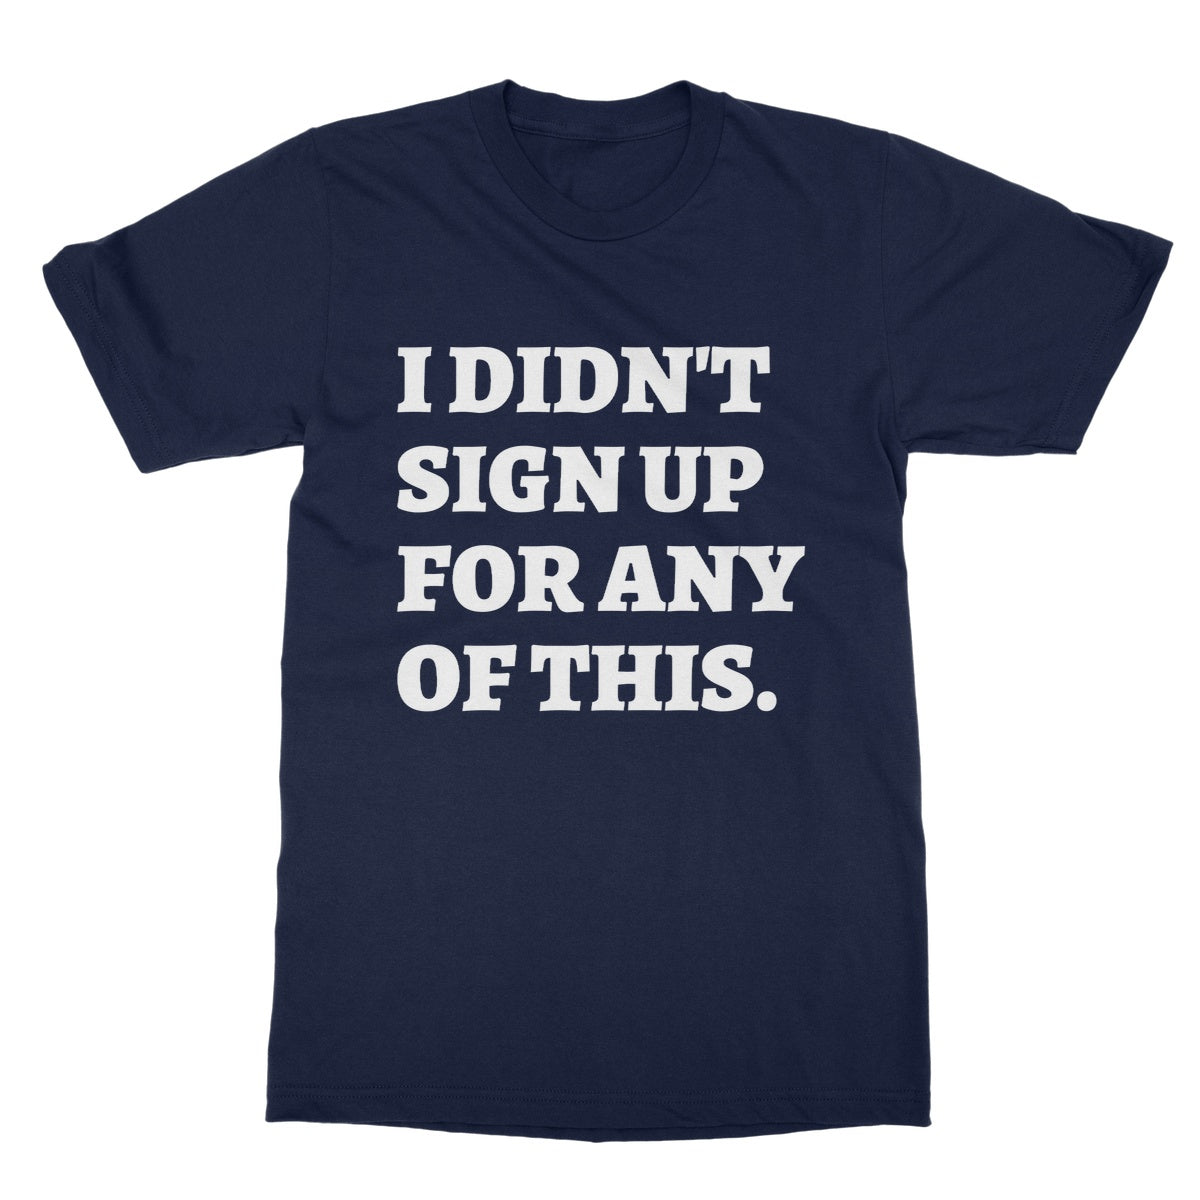 I didn't sign up for this t shirt navy